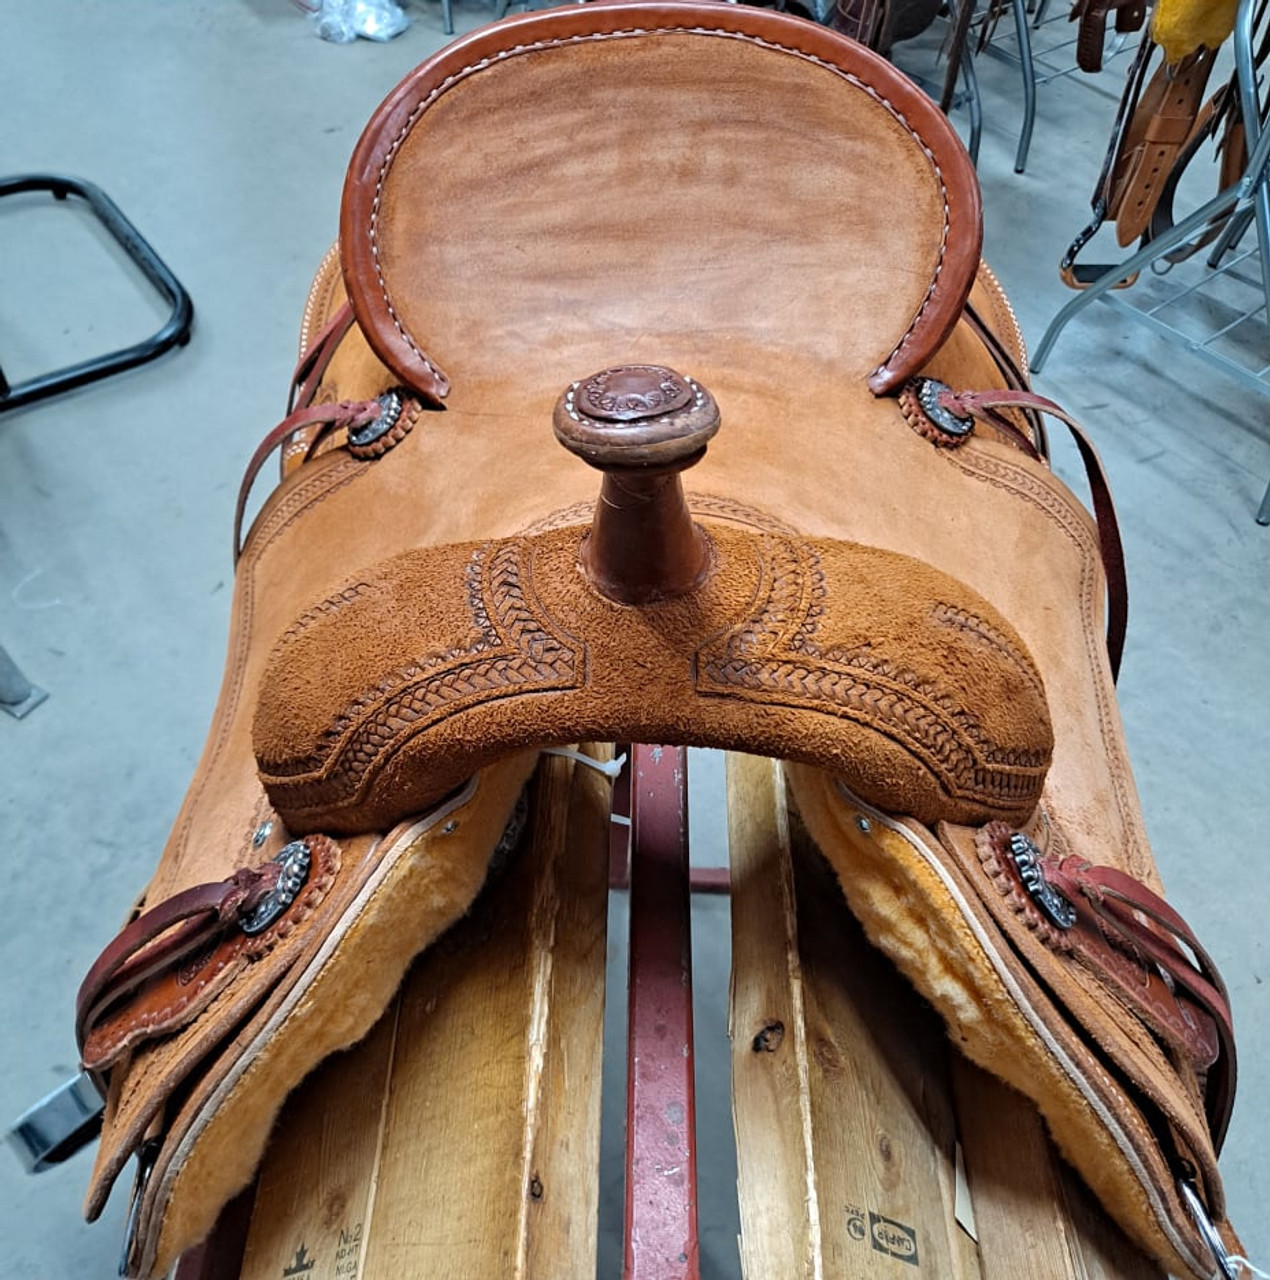 New Jackson Stock Saddle by Fort Worth Saddle Co with 15 inch seat. Handsome rust colored roughout Hermann Oak leather. Gullet size is 8 inch, weight is 28lbs, and skirt is 27 inch. Made in USA. Limited lifetime warranty.

S1443